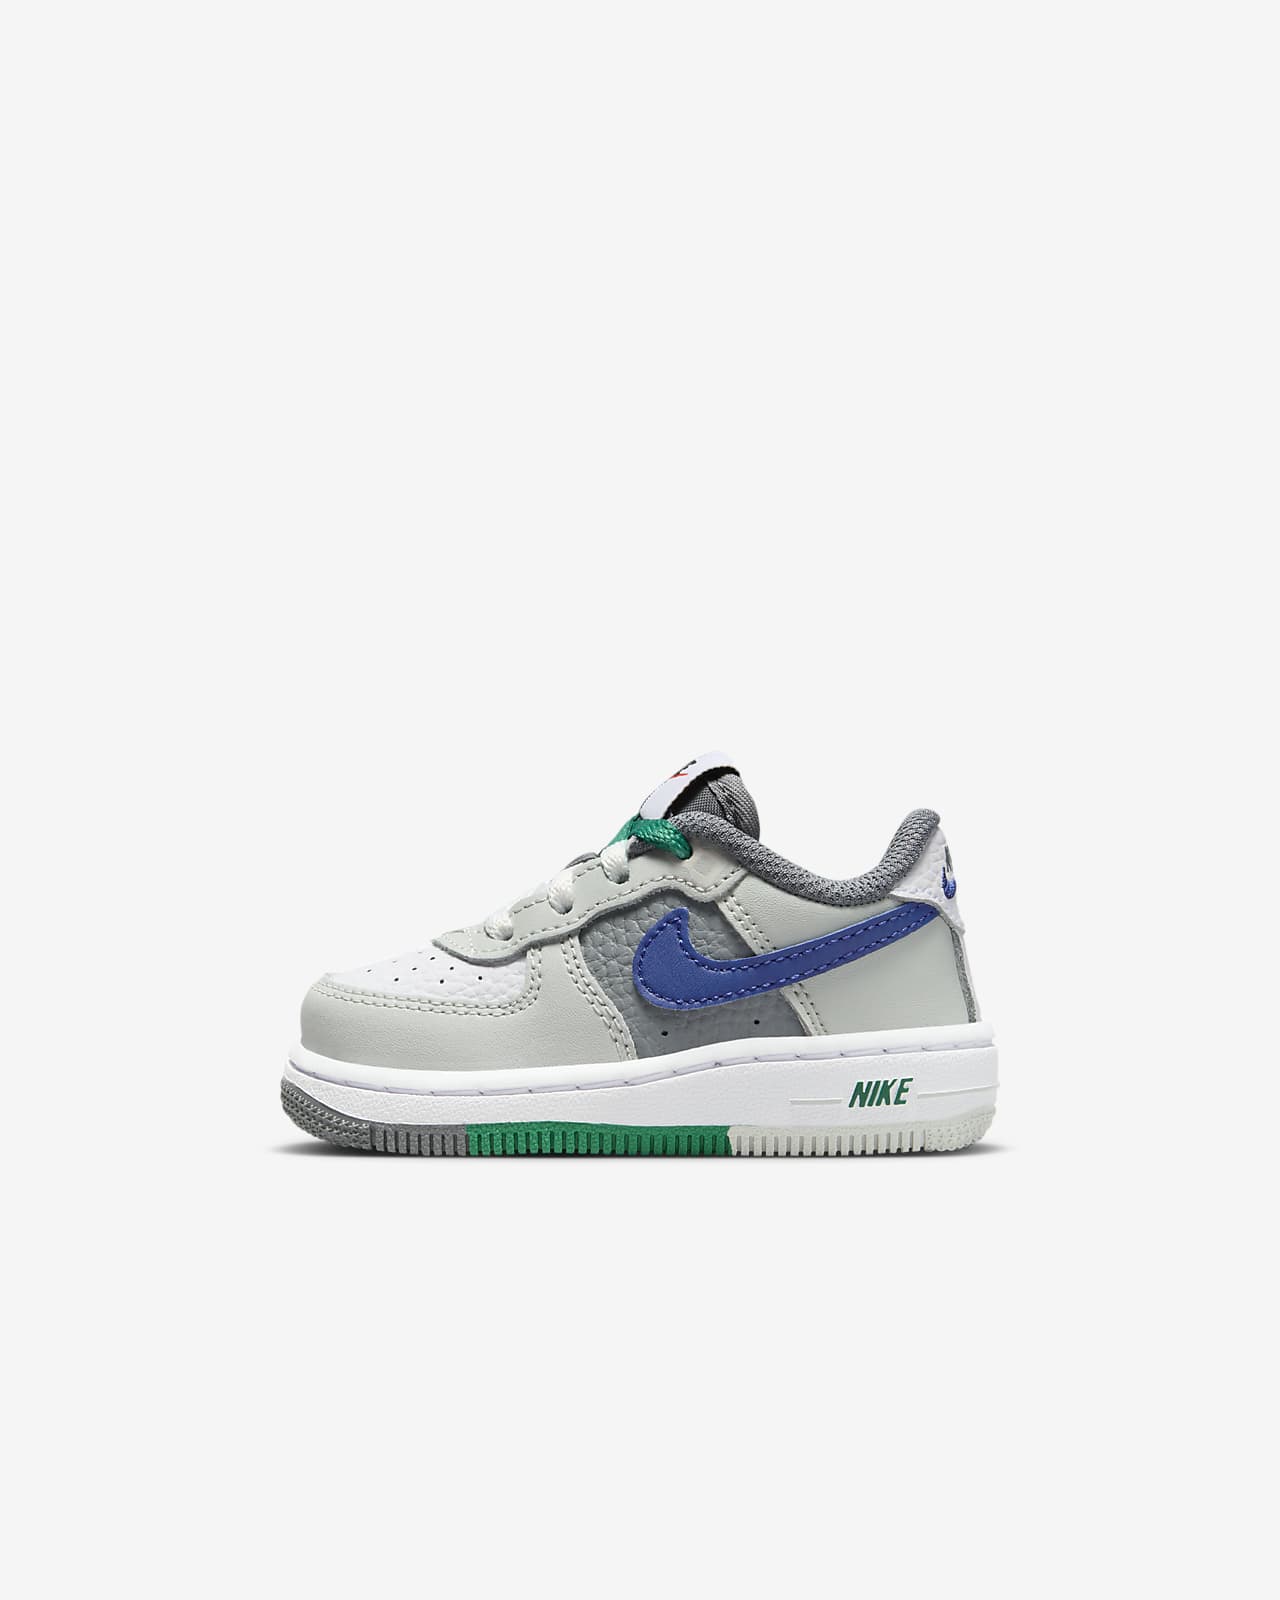 Nike Force 1 LV8 2 Baby/Toddler Shoes.